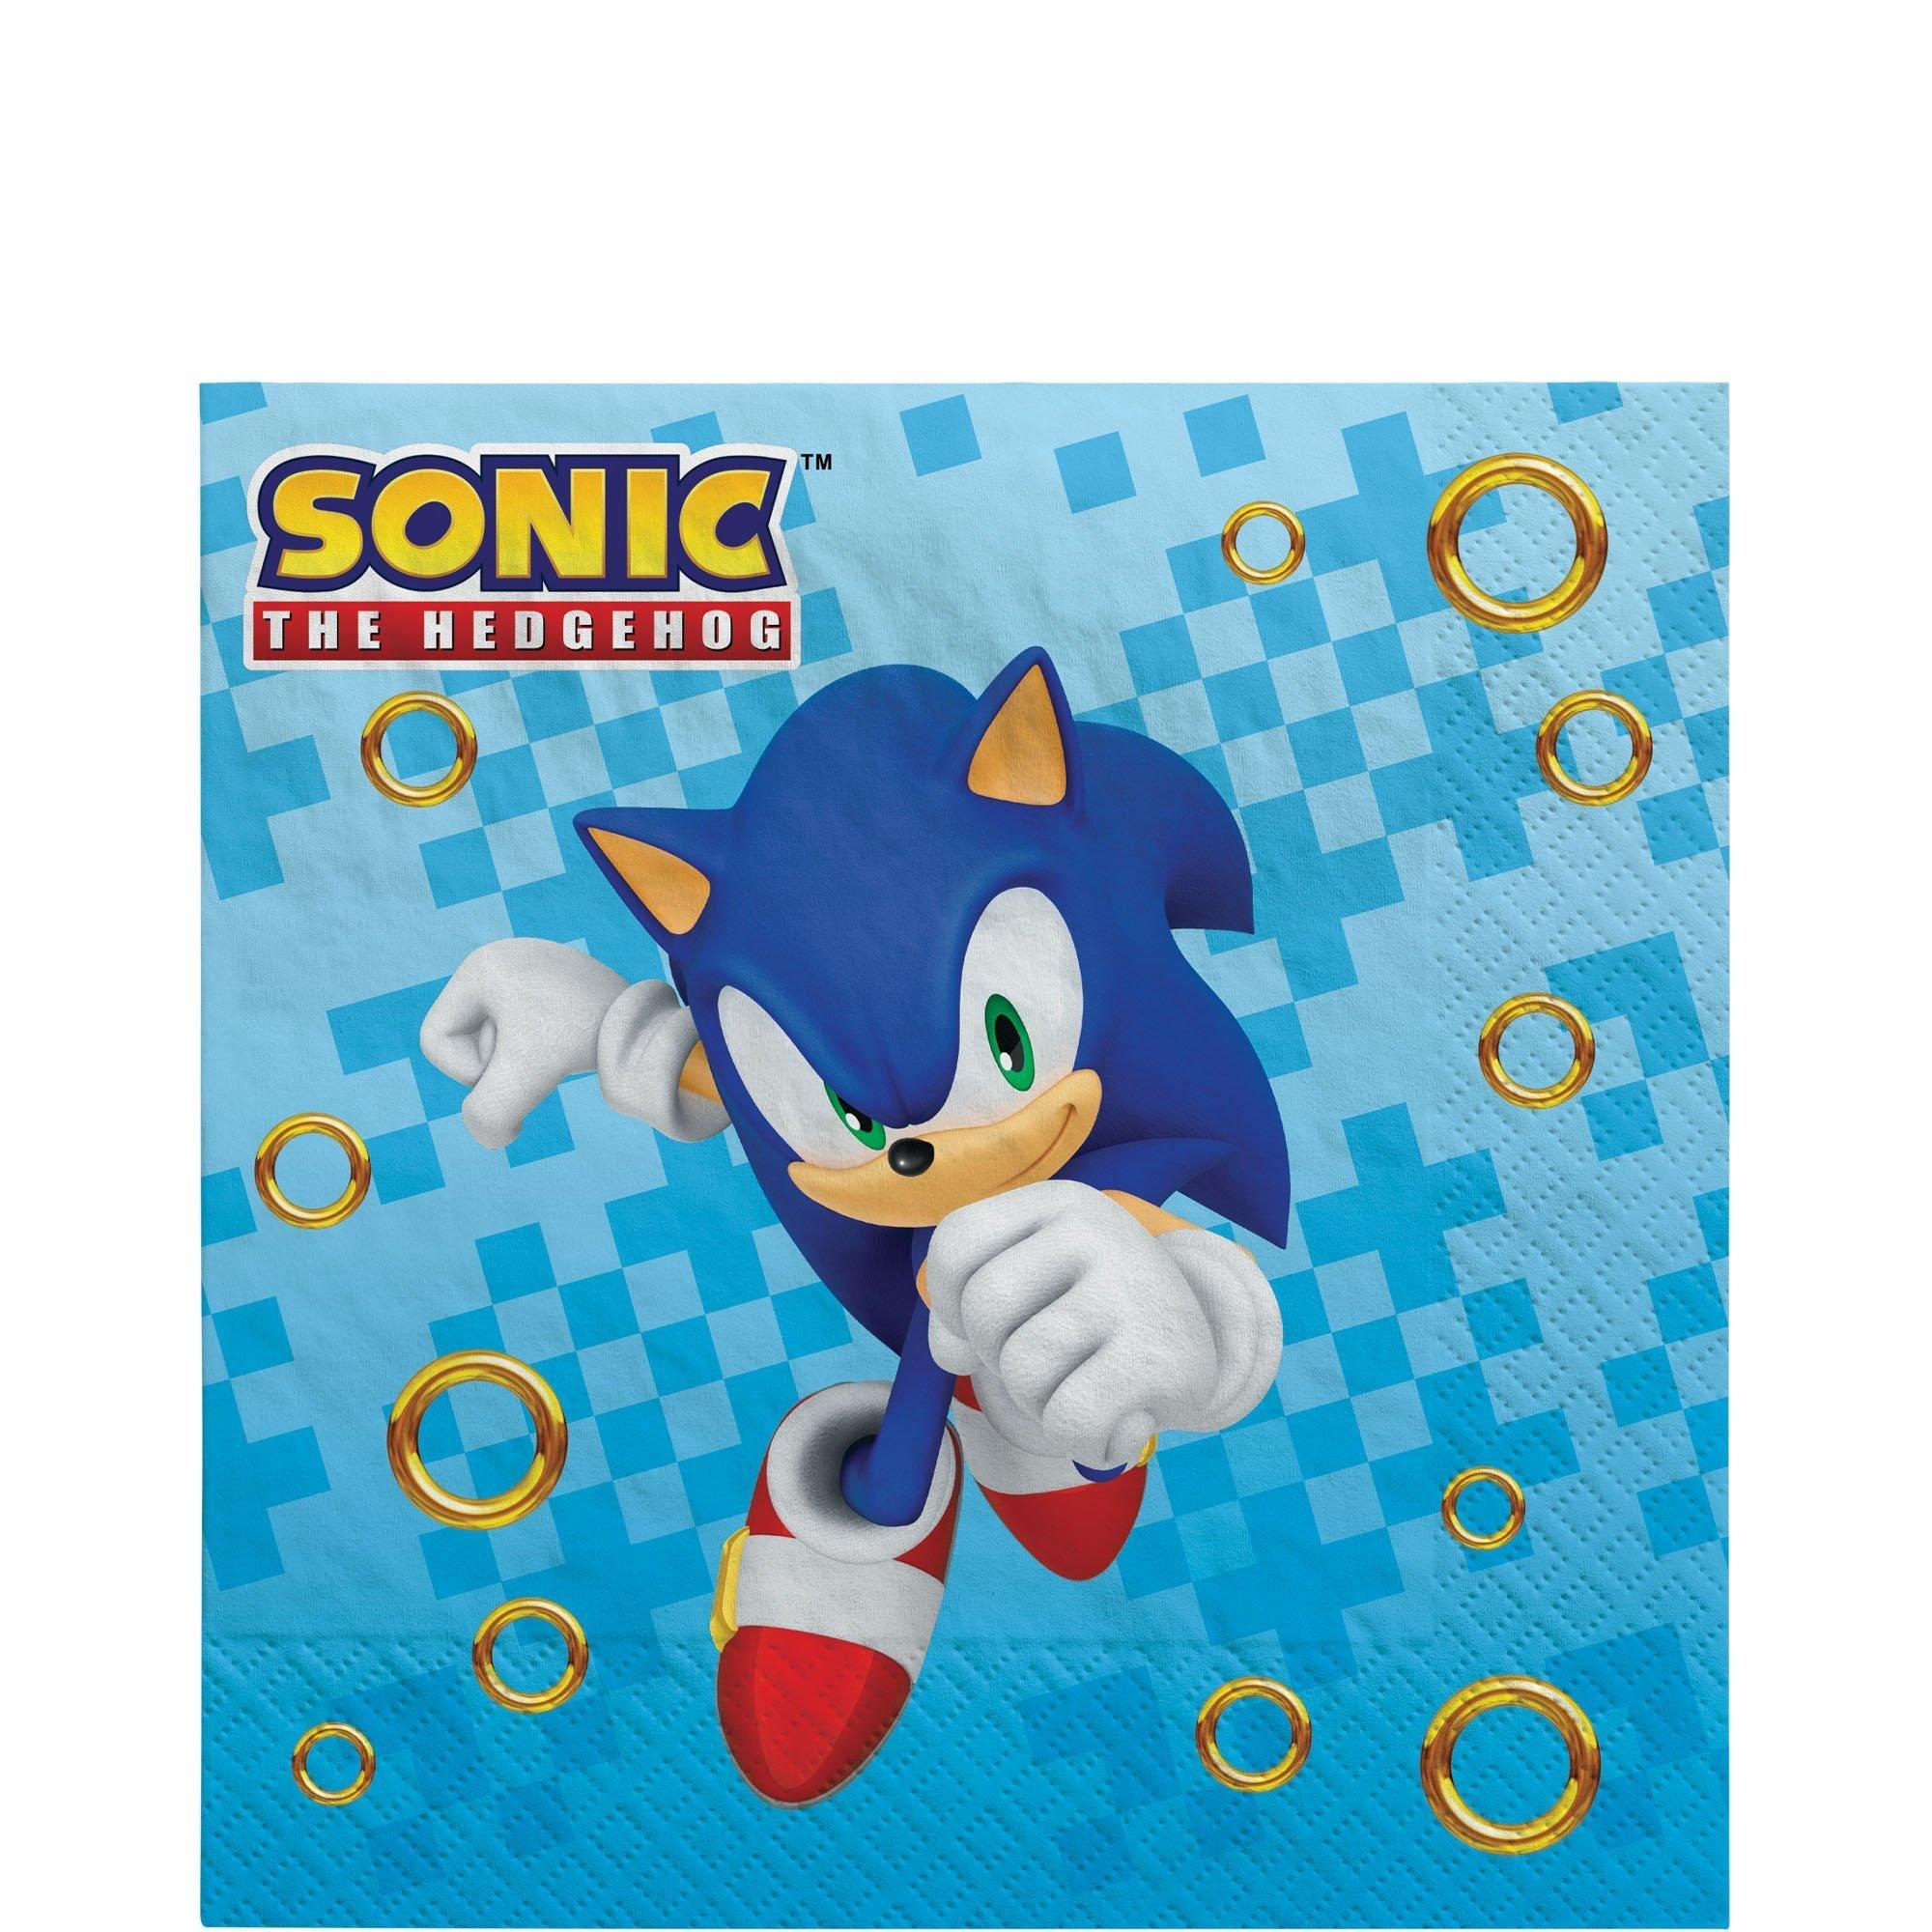 Sonic the Hedgehog Birthday Party Supplies Pack for 8 Guests - Kit Includes Plates, Napkins, Cups, Table Cover, Scene Setter, Photo Booth Props, Themed Latex Balloons & Favor Cup